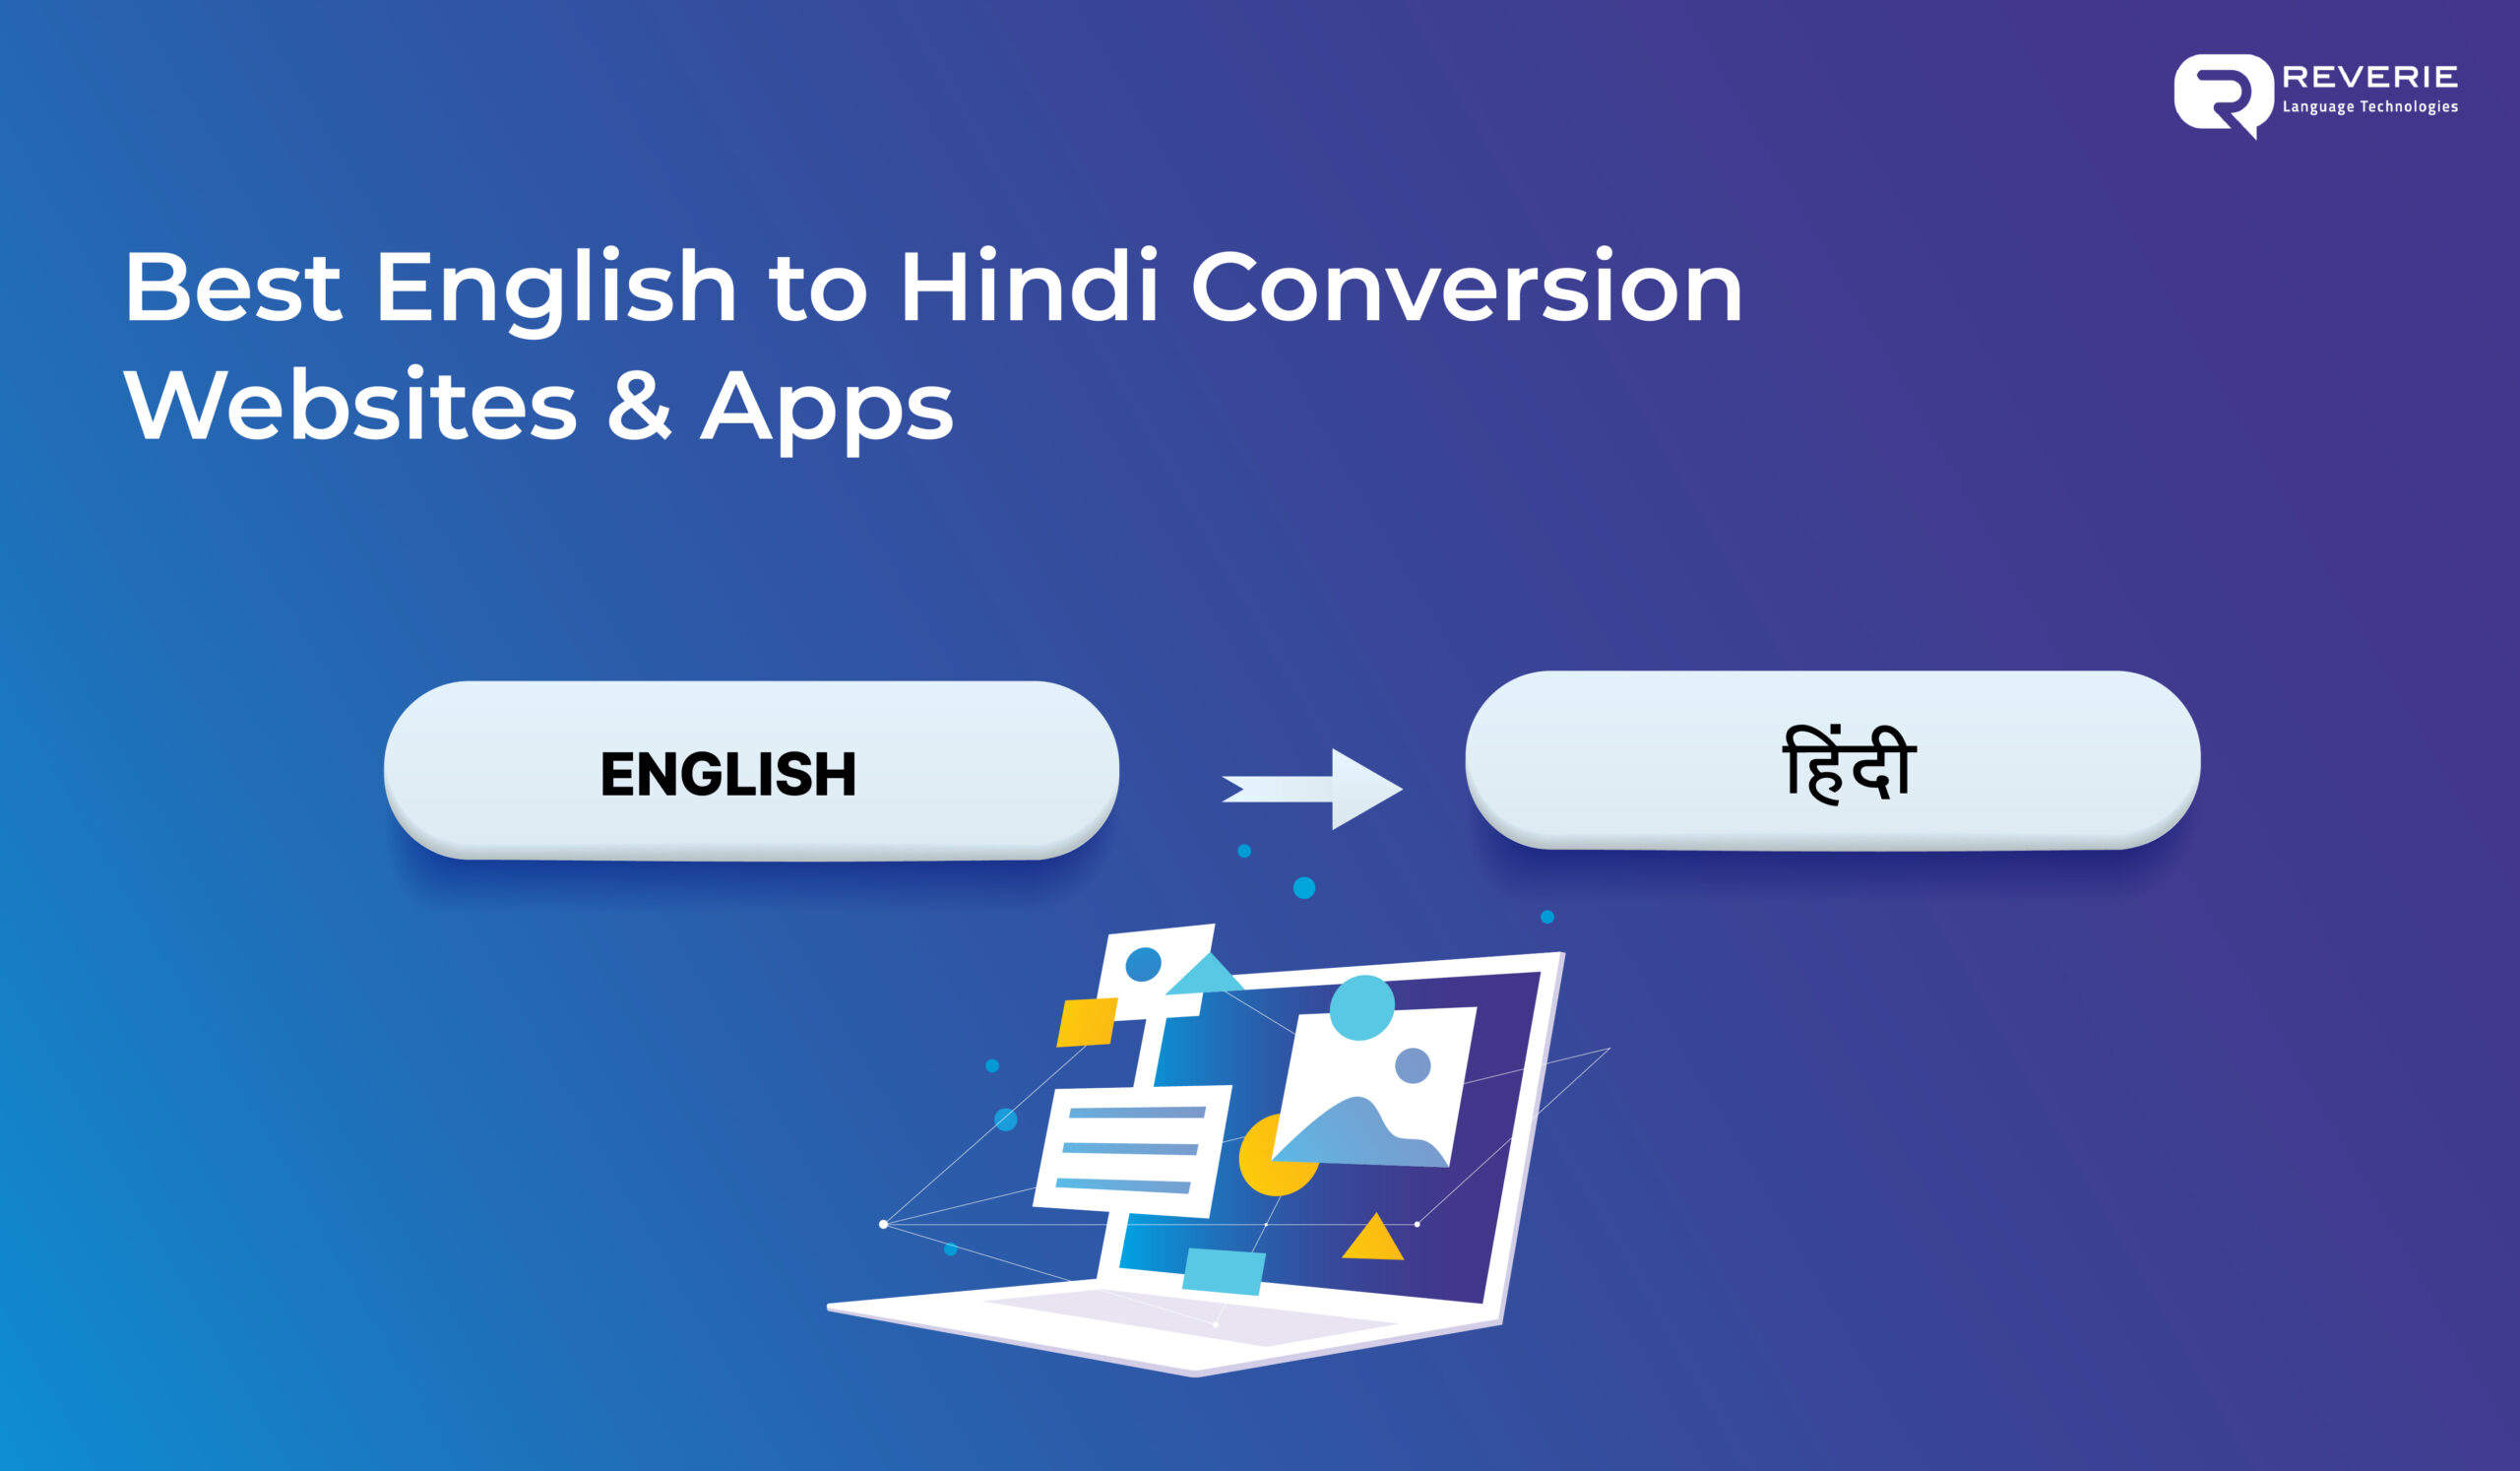 Best English to Hindi Conversion Websites & Apps